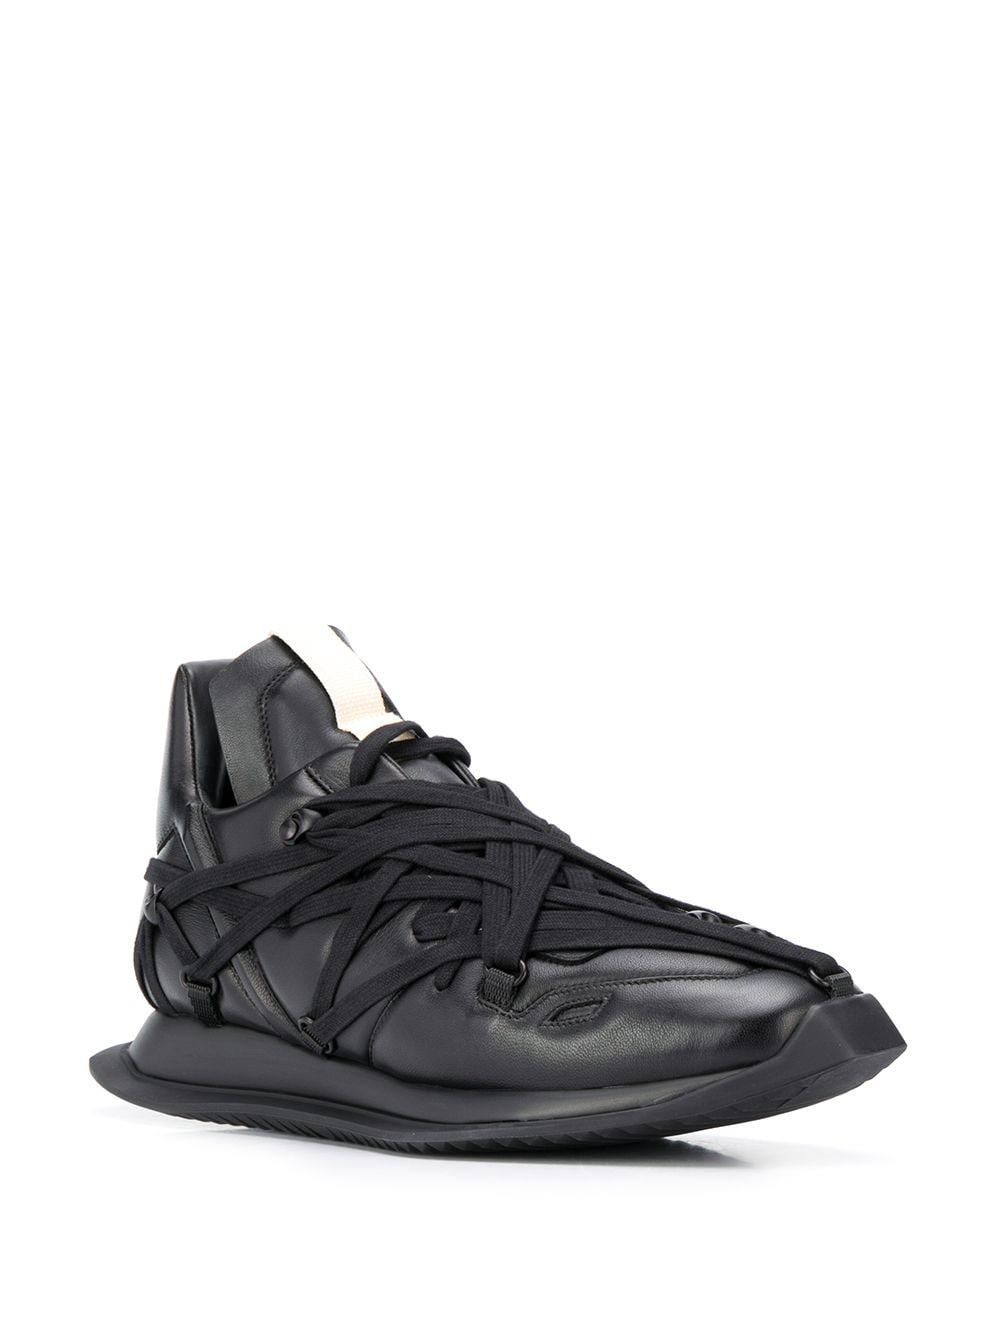 Rick Owens Leather Maximal Runner Sneakers in Black for Men - Lyst